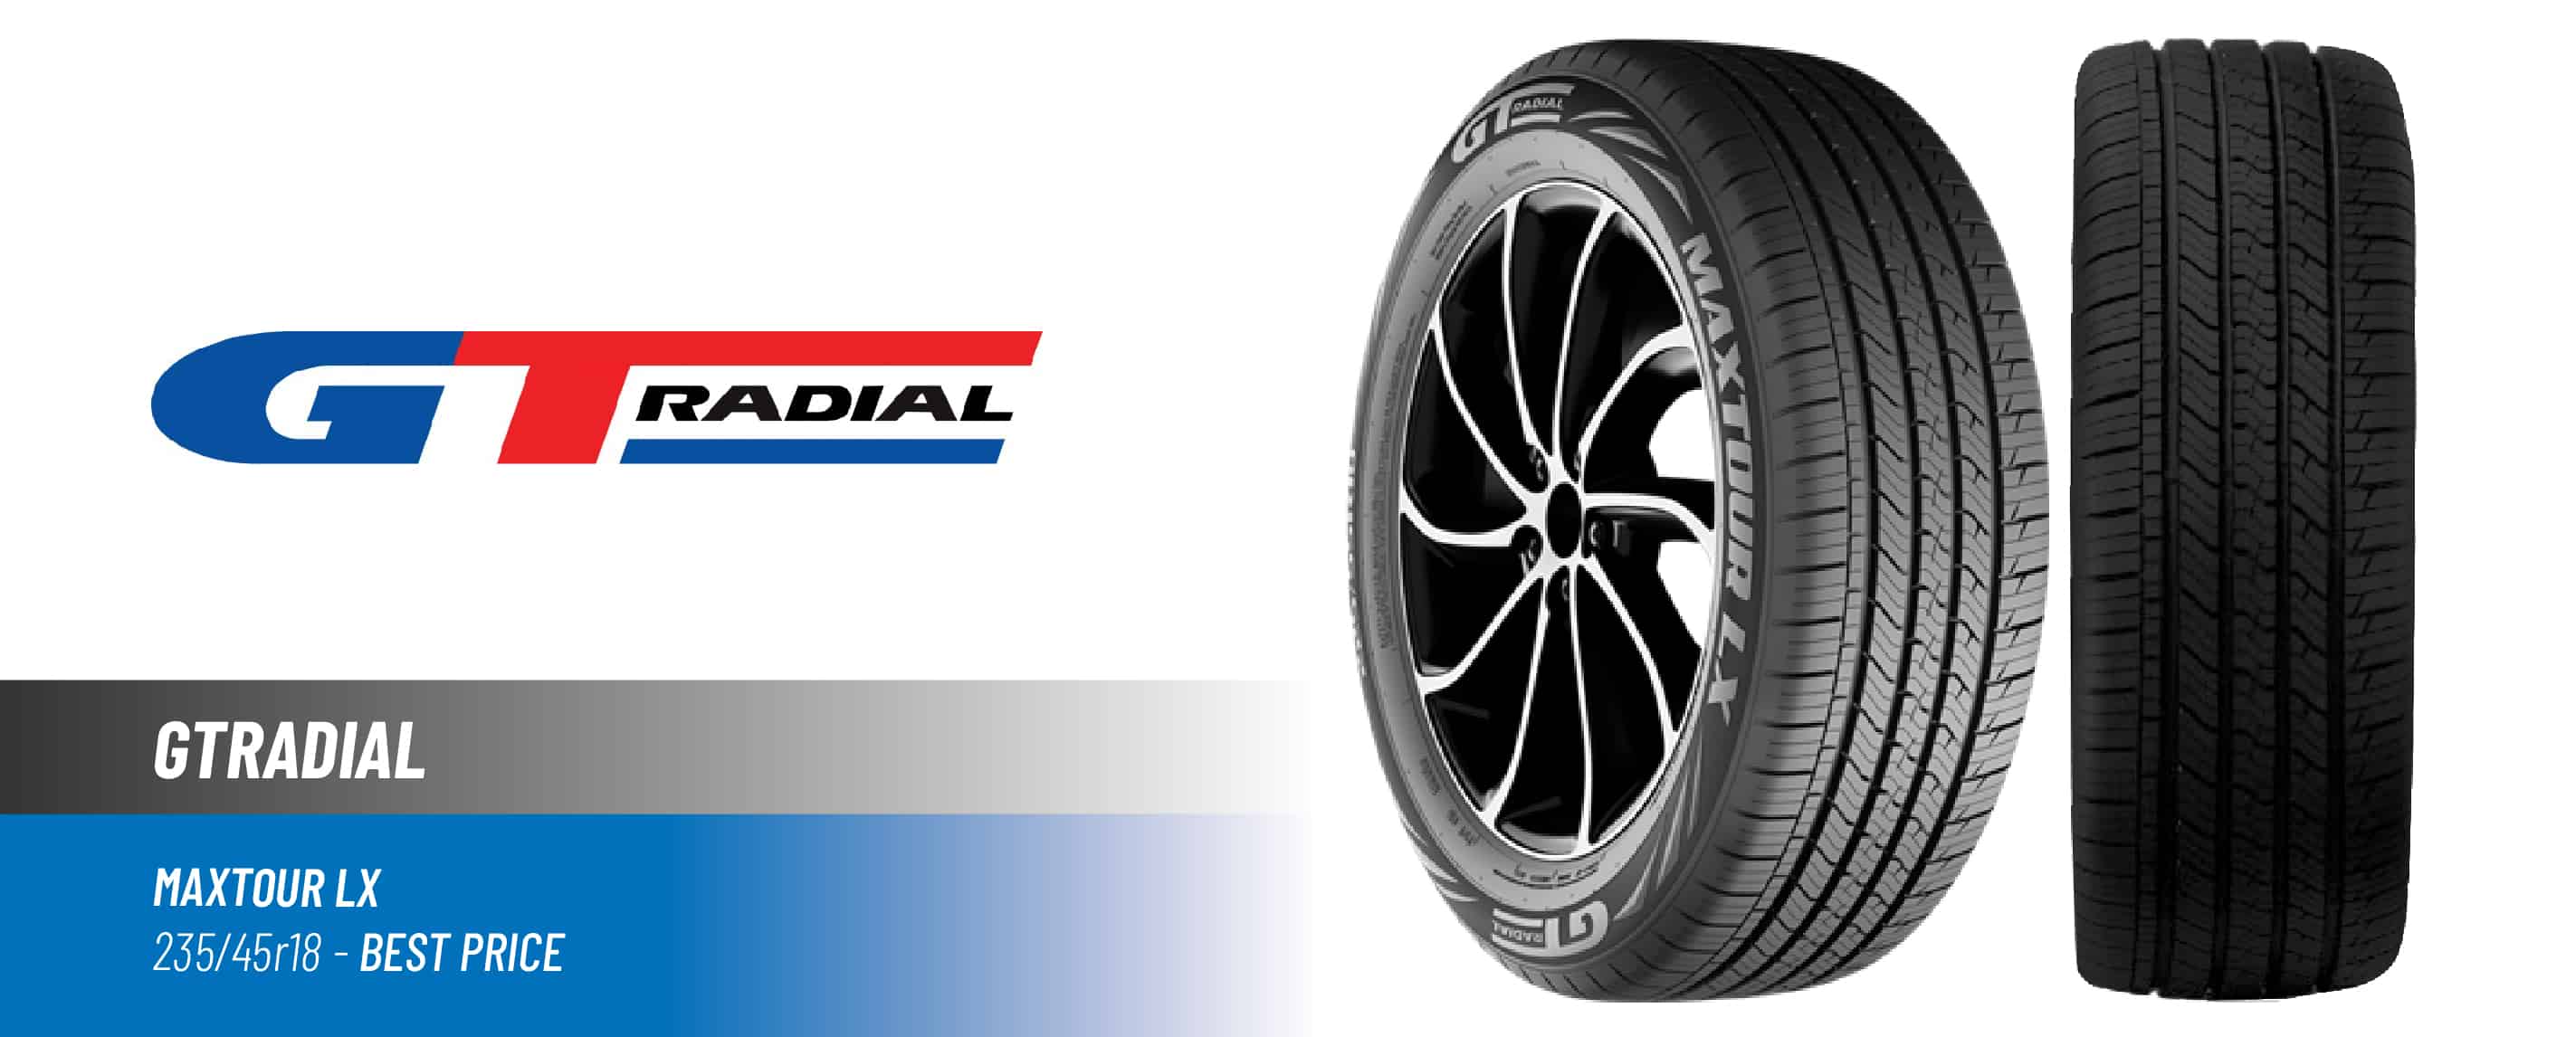 Top#2 Best Price: GTRadial Maxtour LX – 235 45 r18